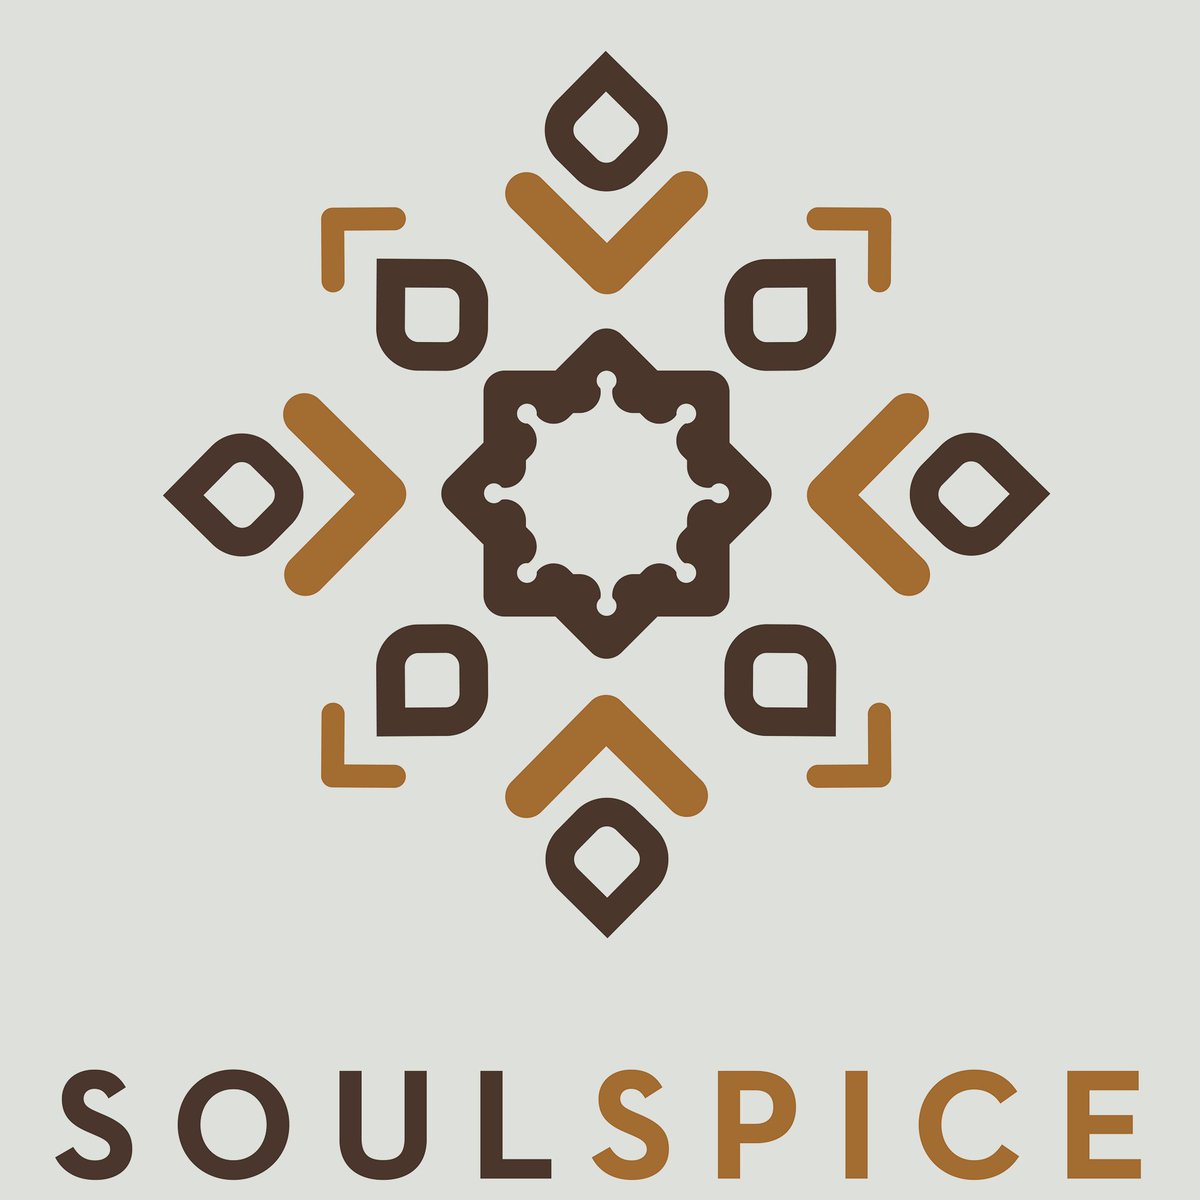 If you're coming along to our @LINKFEST18 Sunday All Dayer at @GlobetrotPonty next weekend, then keep an eye out for Pontypridd's own #SoulSpice, who will be serving delicious #Vegan food at their pop-up stall throughout the day! wegottickets.com/staylittlemusic